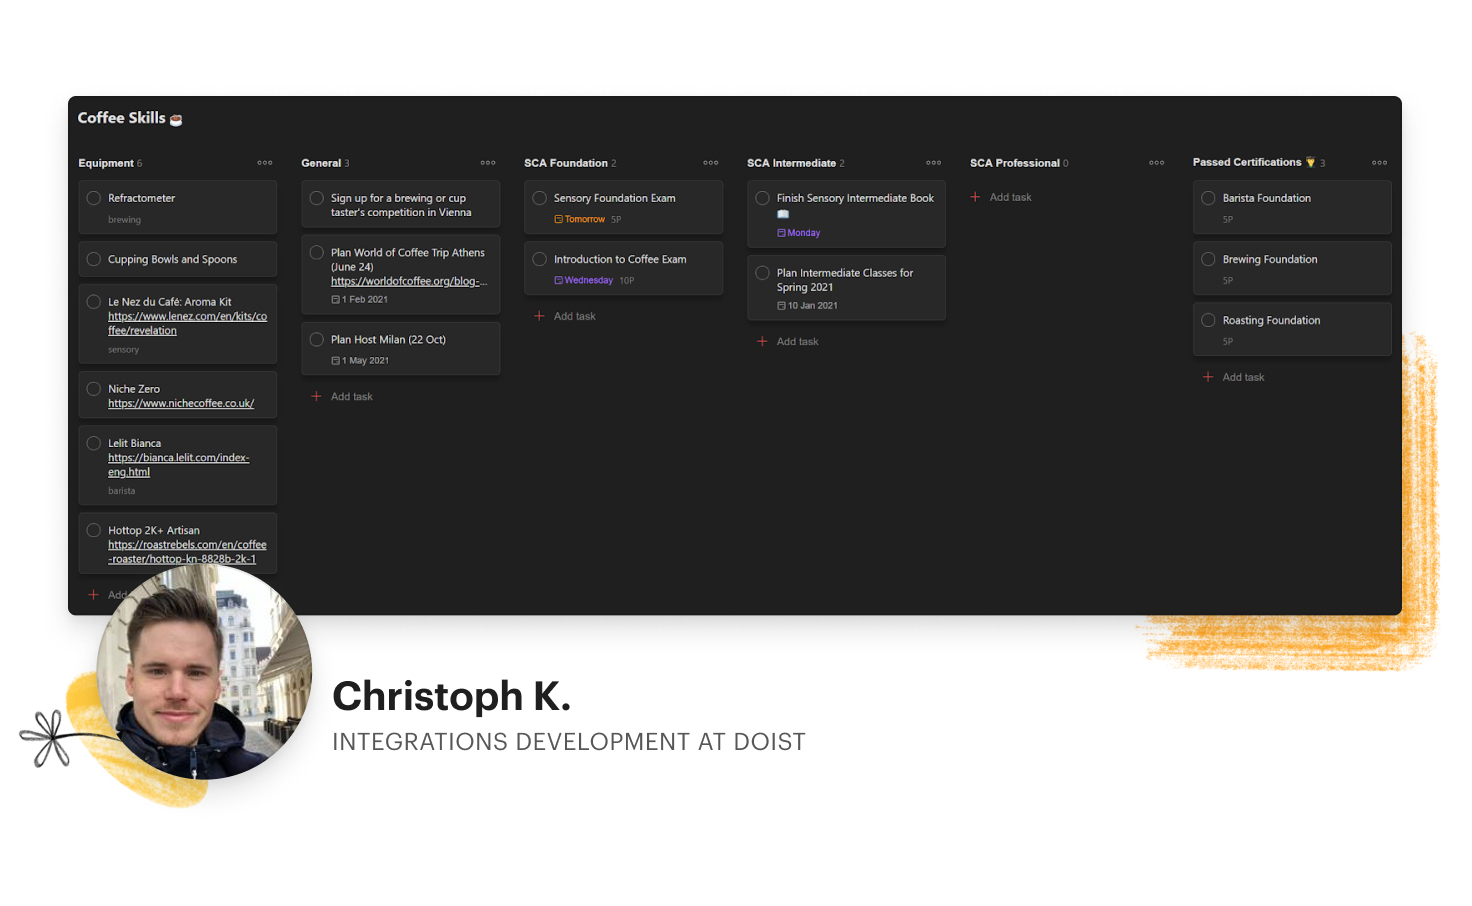 Todoist Board features Christoph